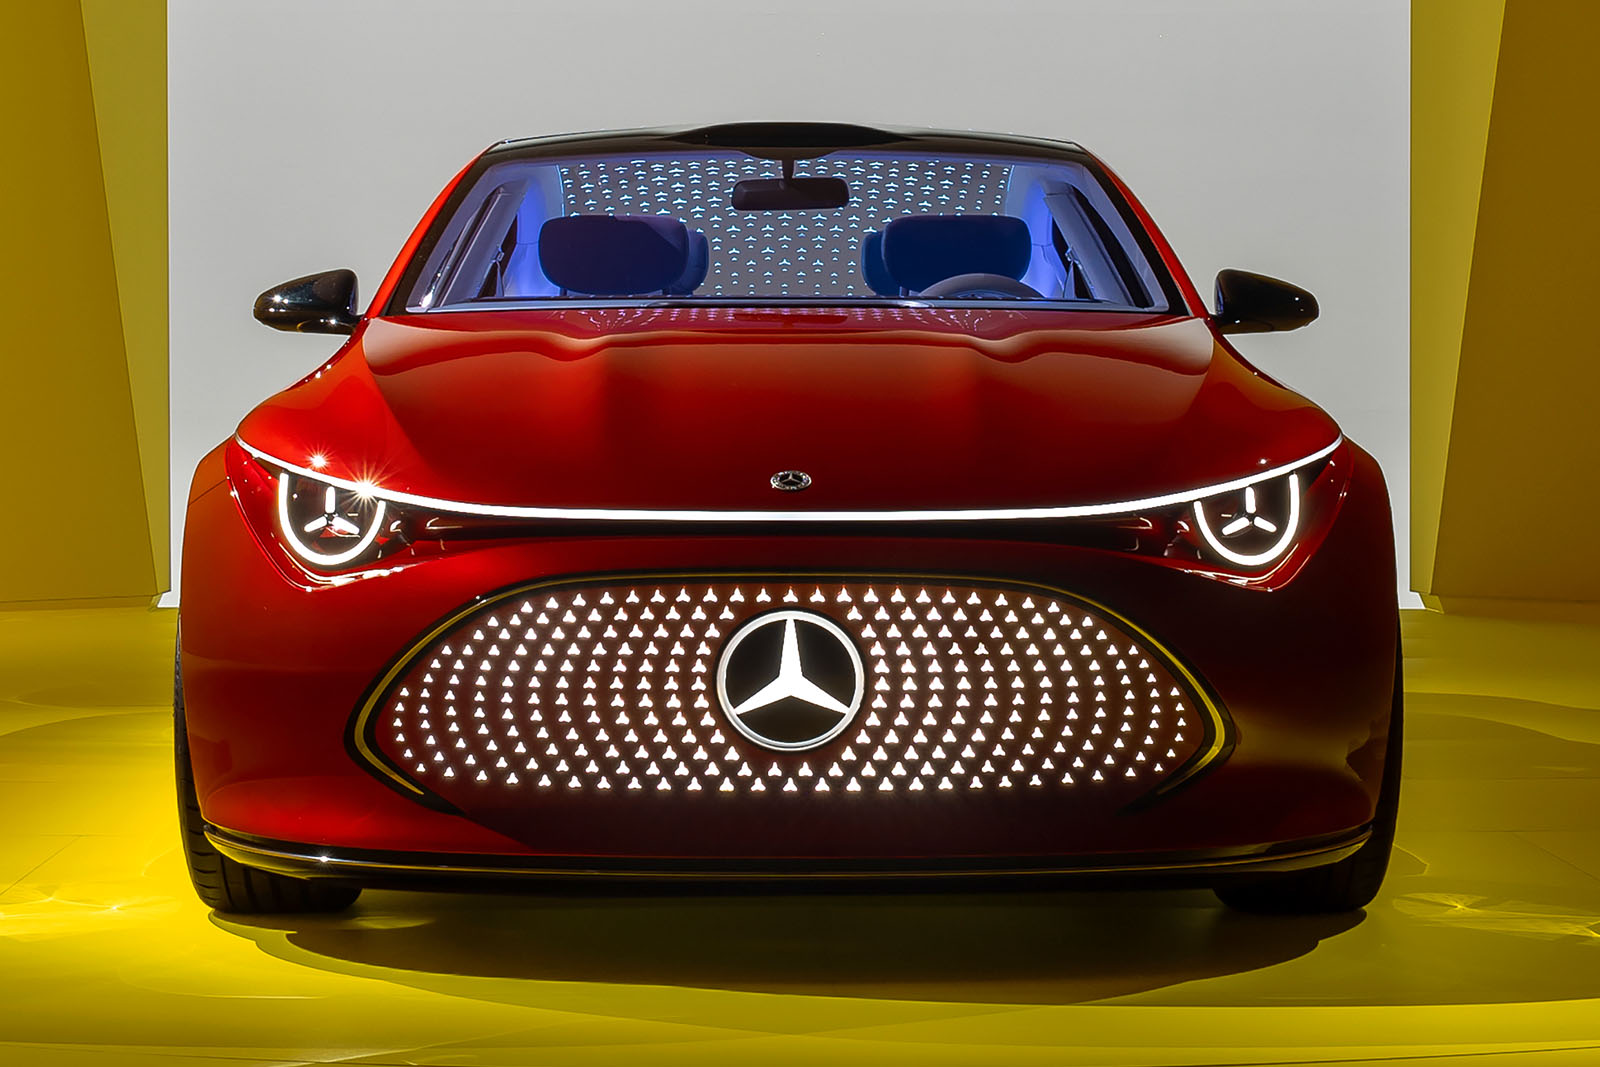 DRLs of Mercedes CLA concept to be electric exhaust of future